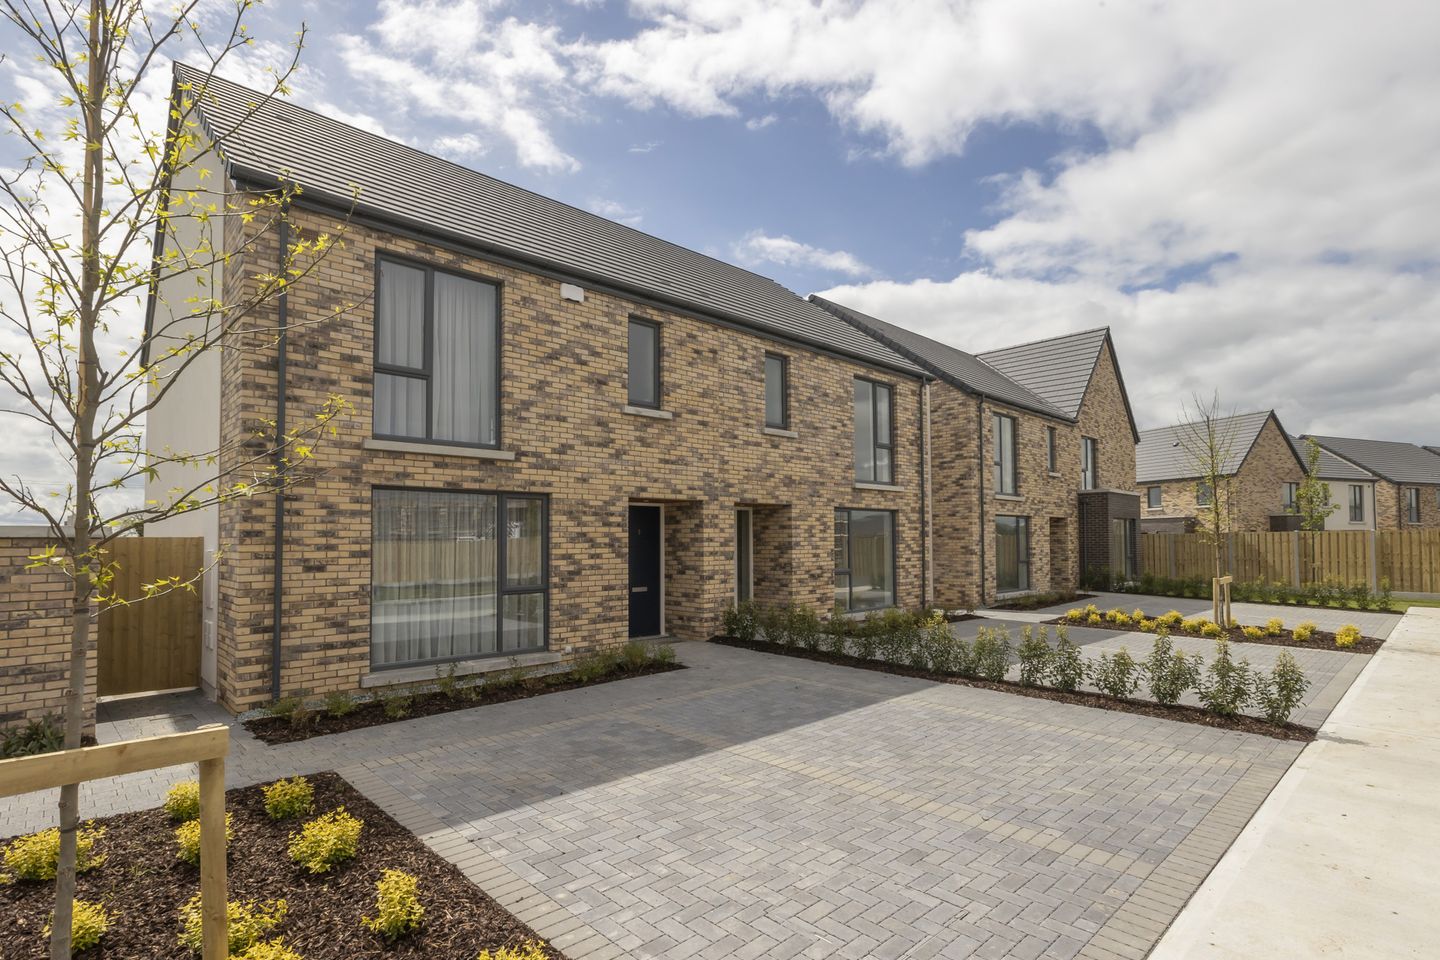 2 Bedroom House, Ballymakenny Park, 2 Bedroom House, Ballymakenny Park, Drogheda, Co. Louth